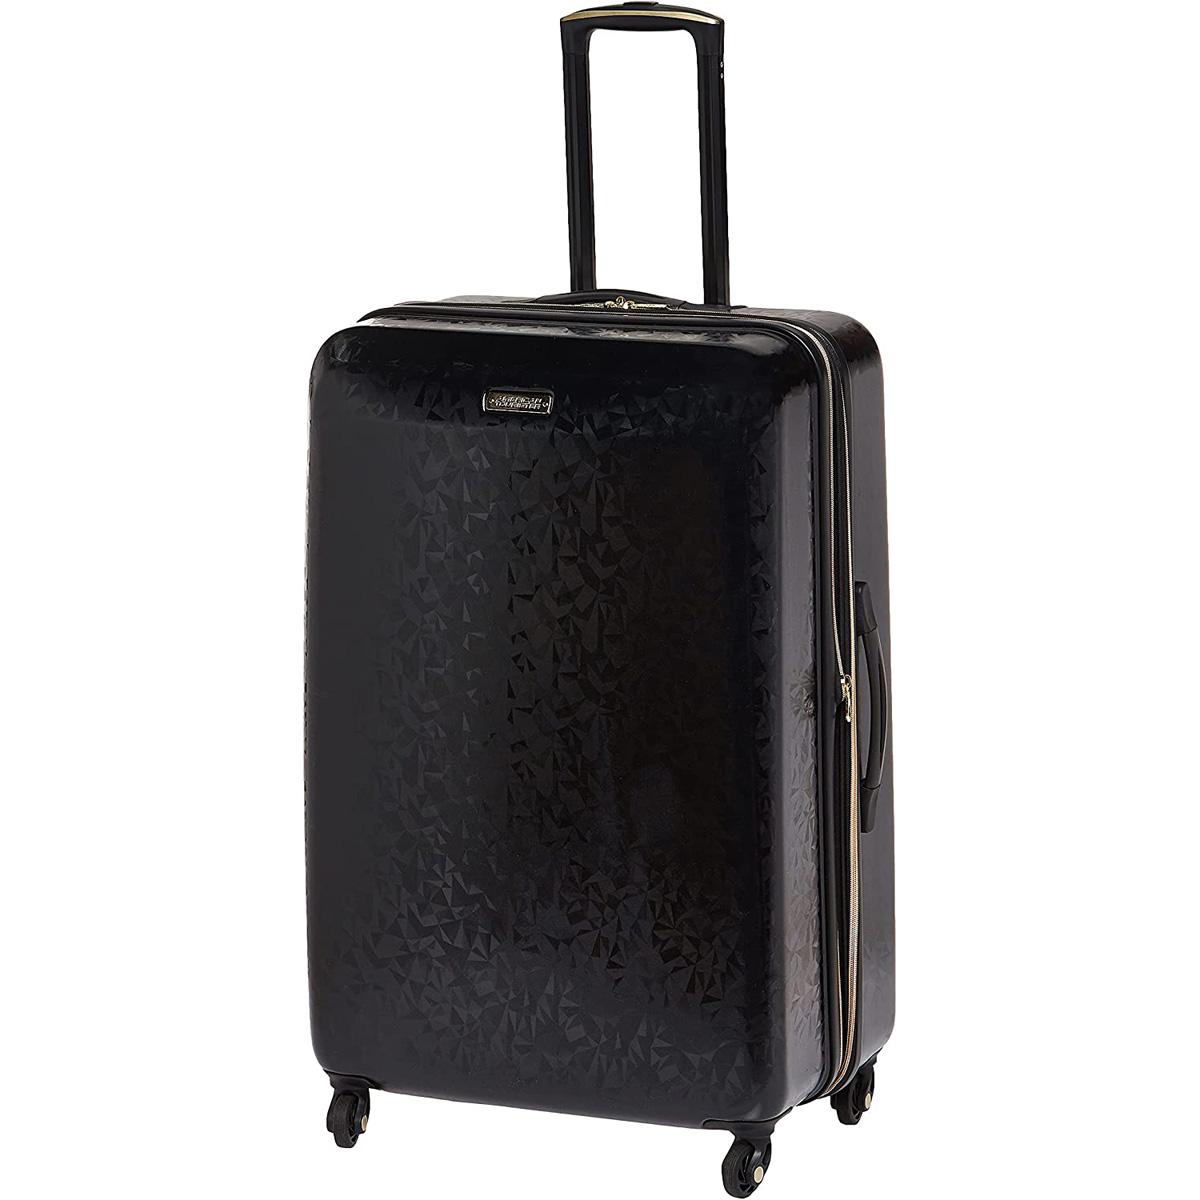 American Tourister Belle Voyage Hardside 21in Luggage for $65.54 Shipped